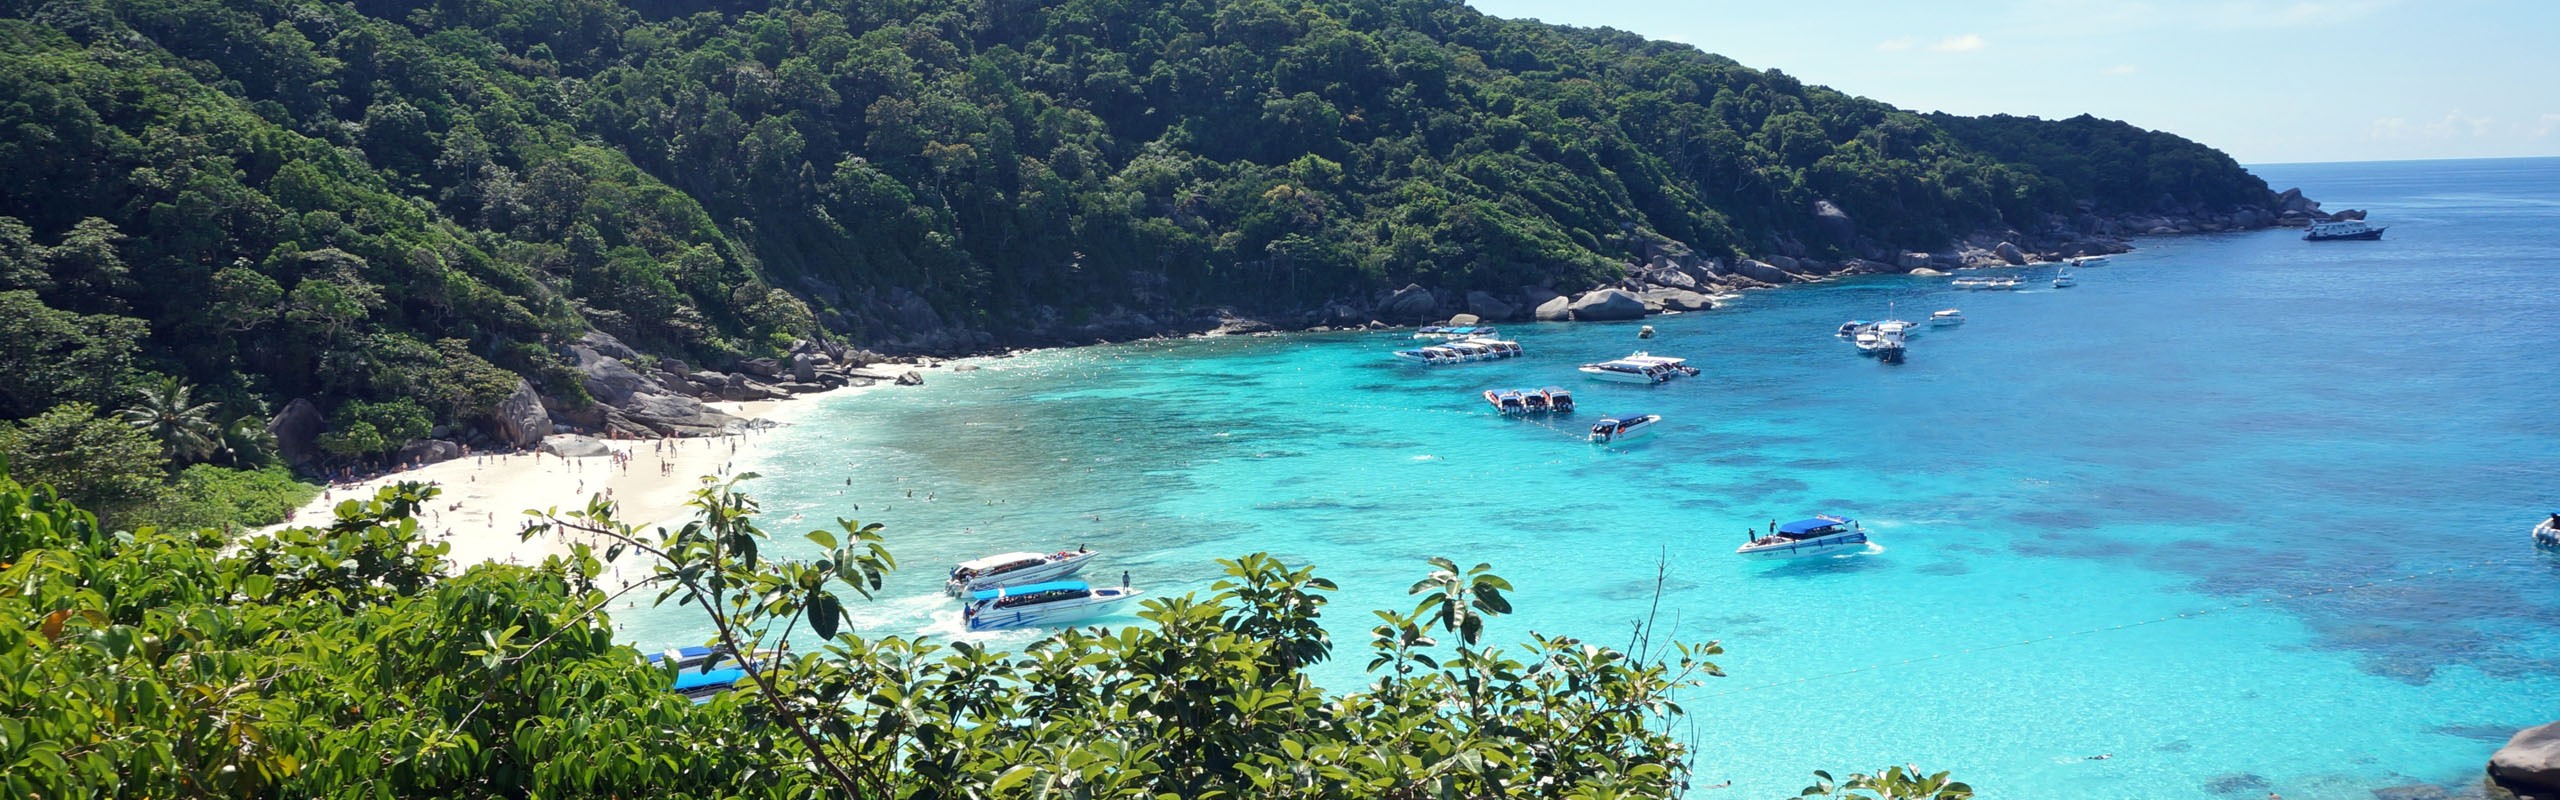 Similan Islands: What Is It Famous For, What to Do, How to Visit